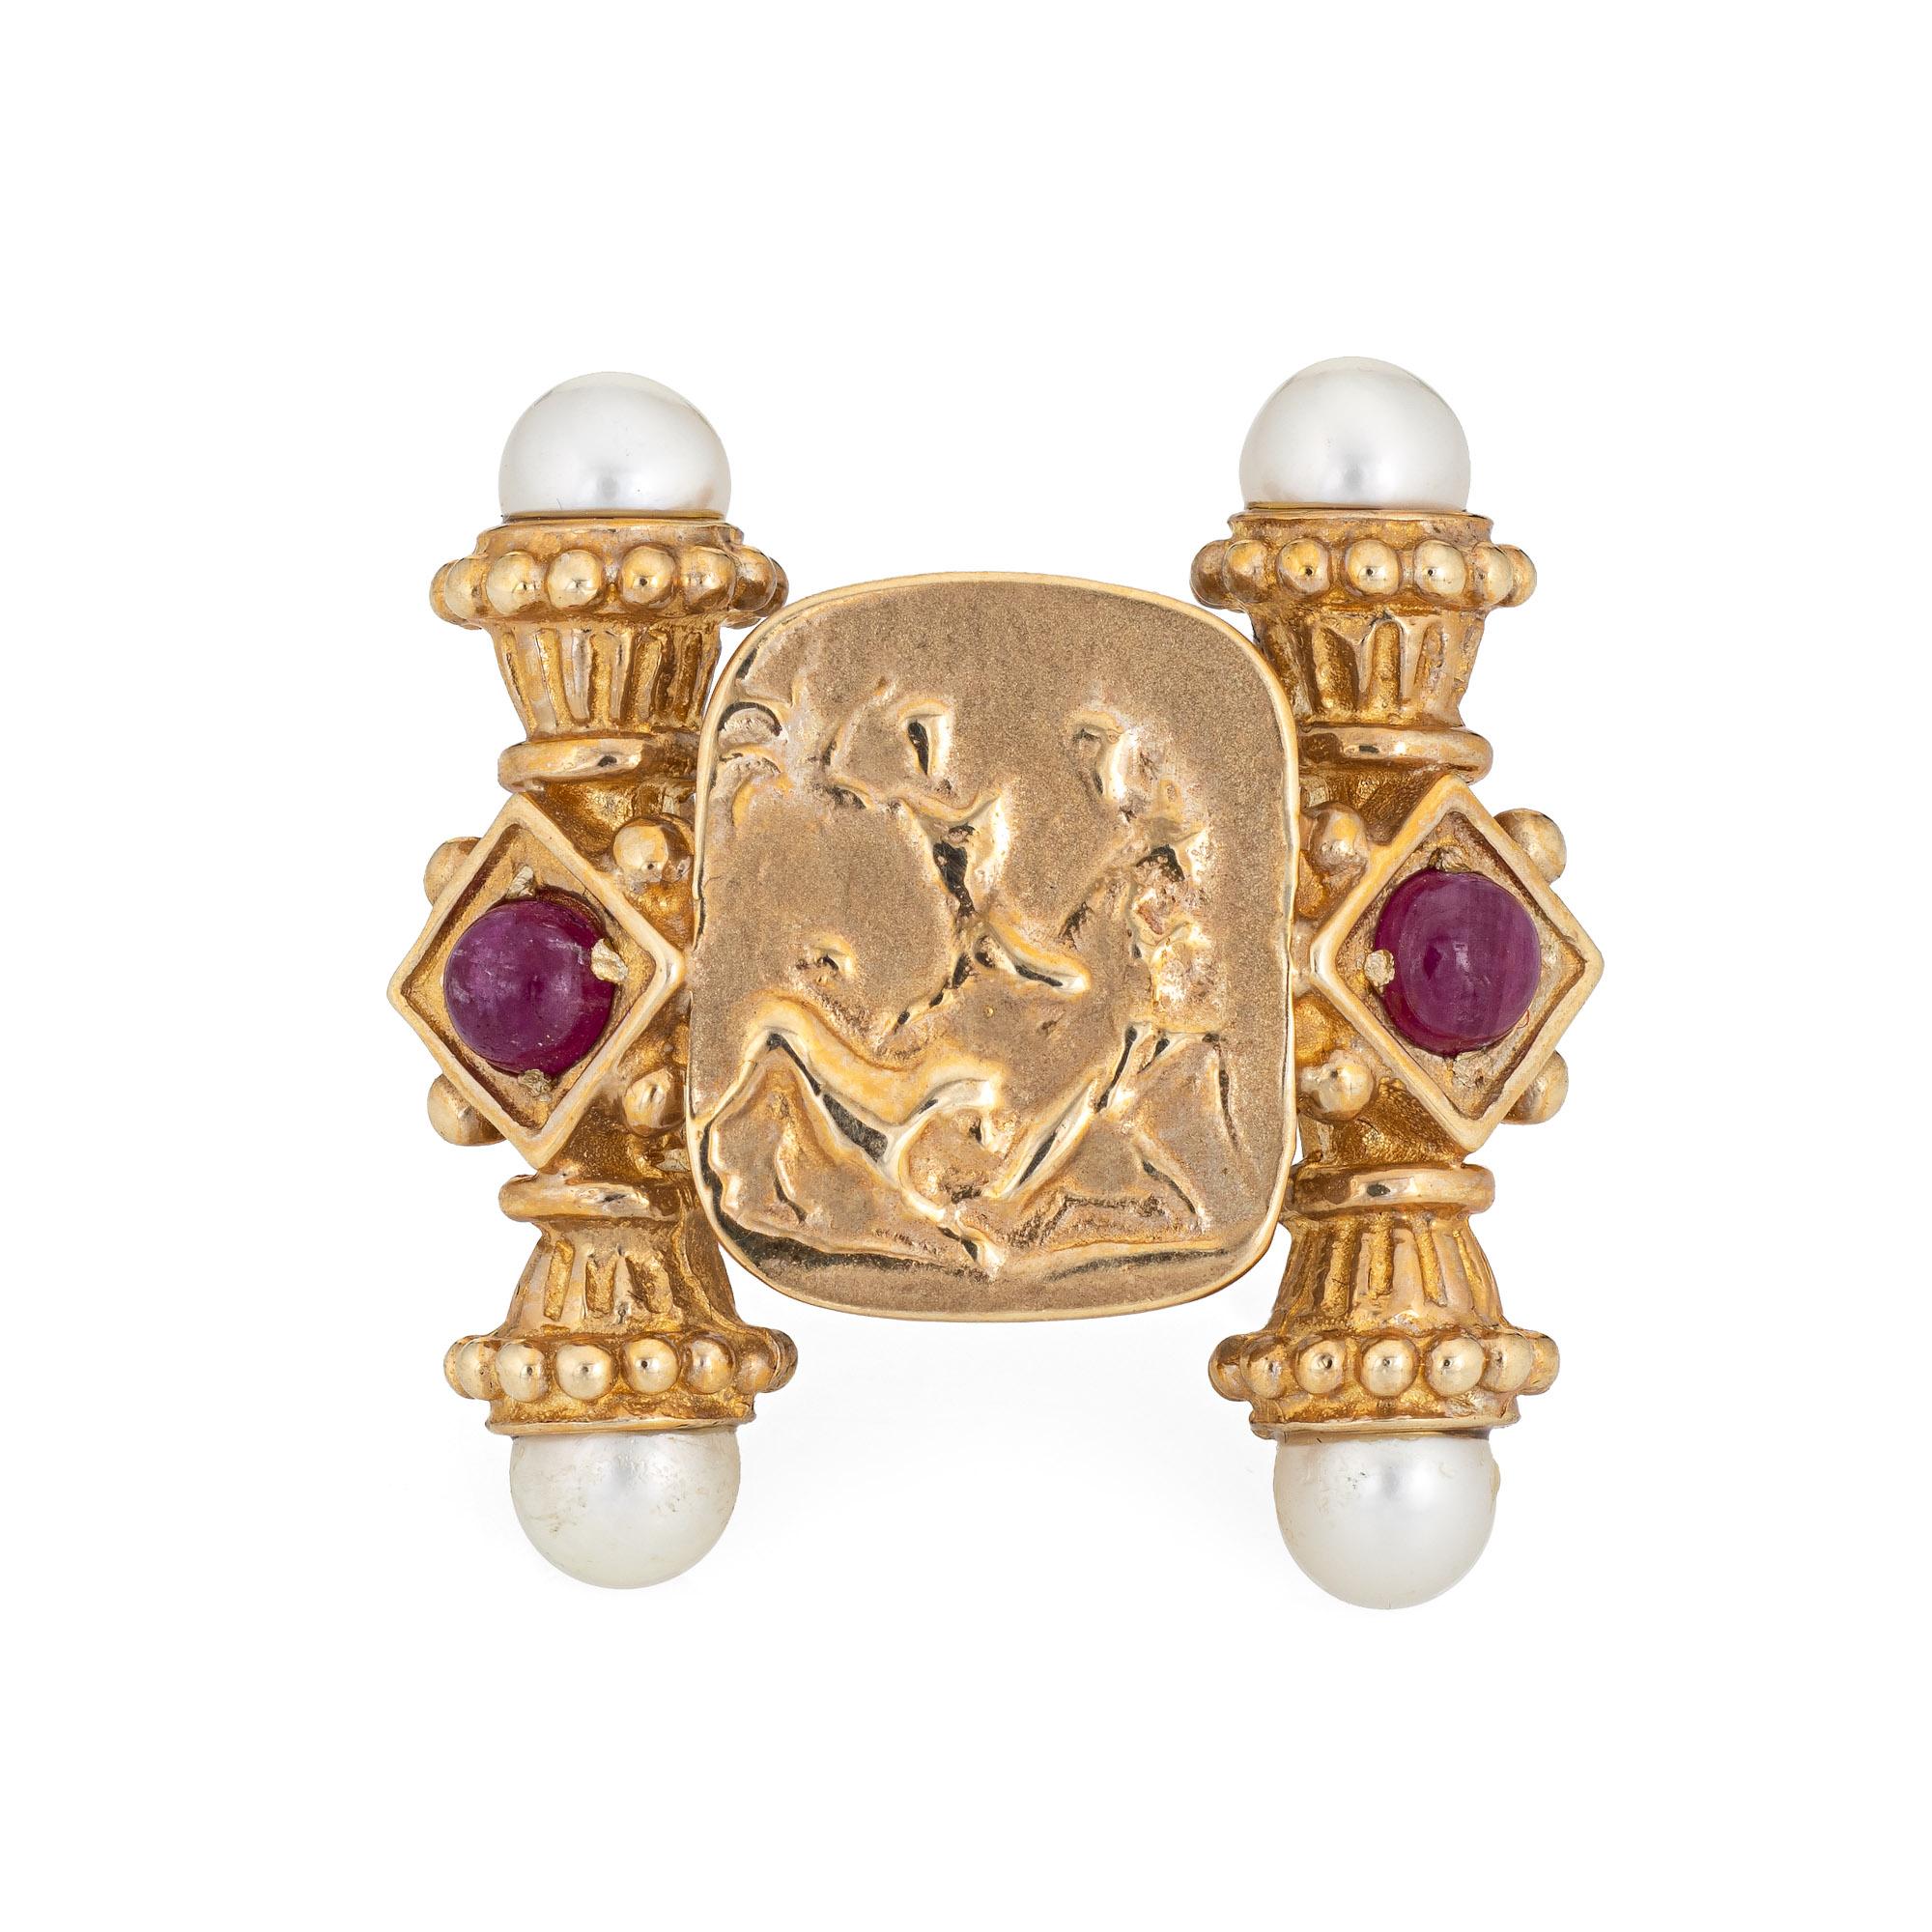 Stylish Italian Tagliamonte ring crafted in 14 karat yellow gold. 

Cabochon cut rubies are estimated at 0.20 carats each and total an estimated 0.40 carats. Four pearls measure 5.5mm each. 

The cameo style ring depicts an artful scene framed with